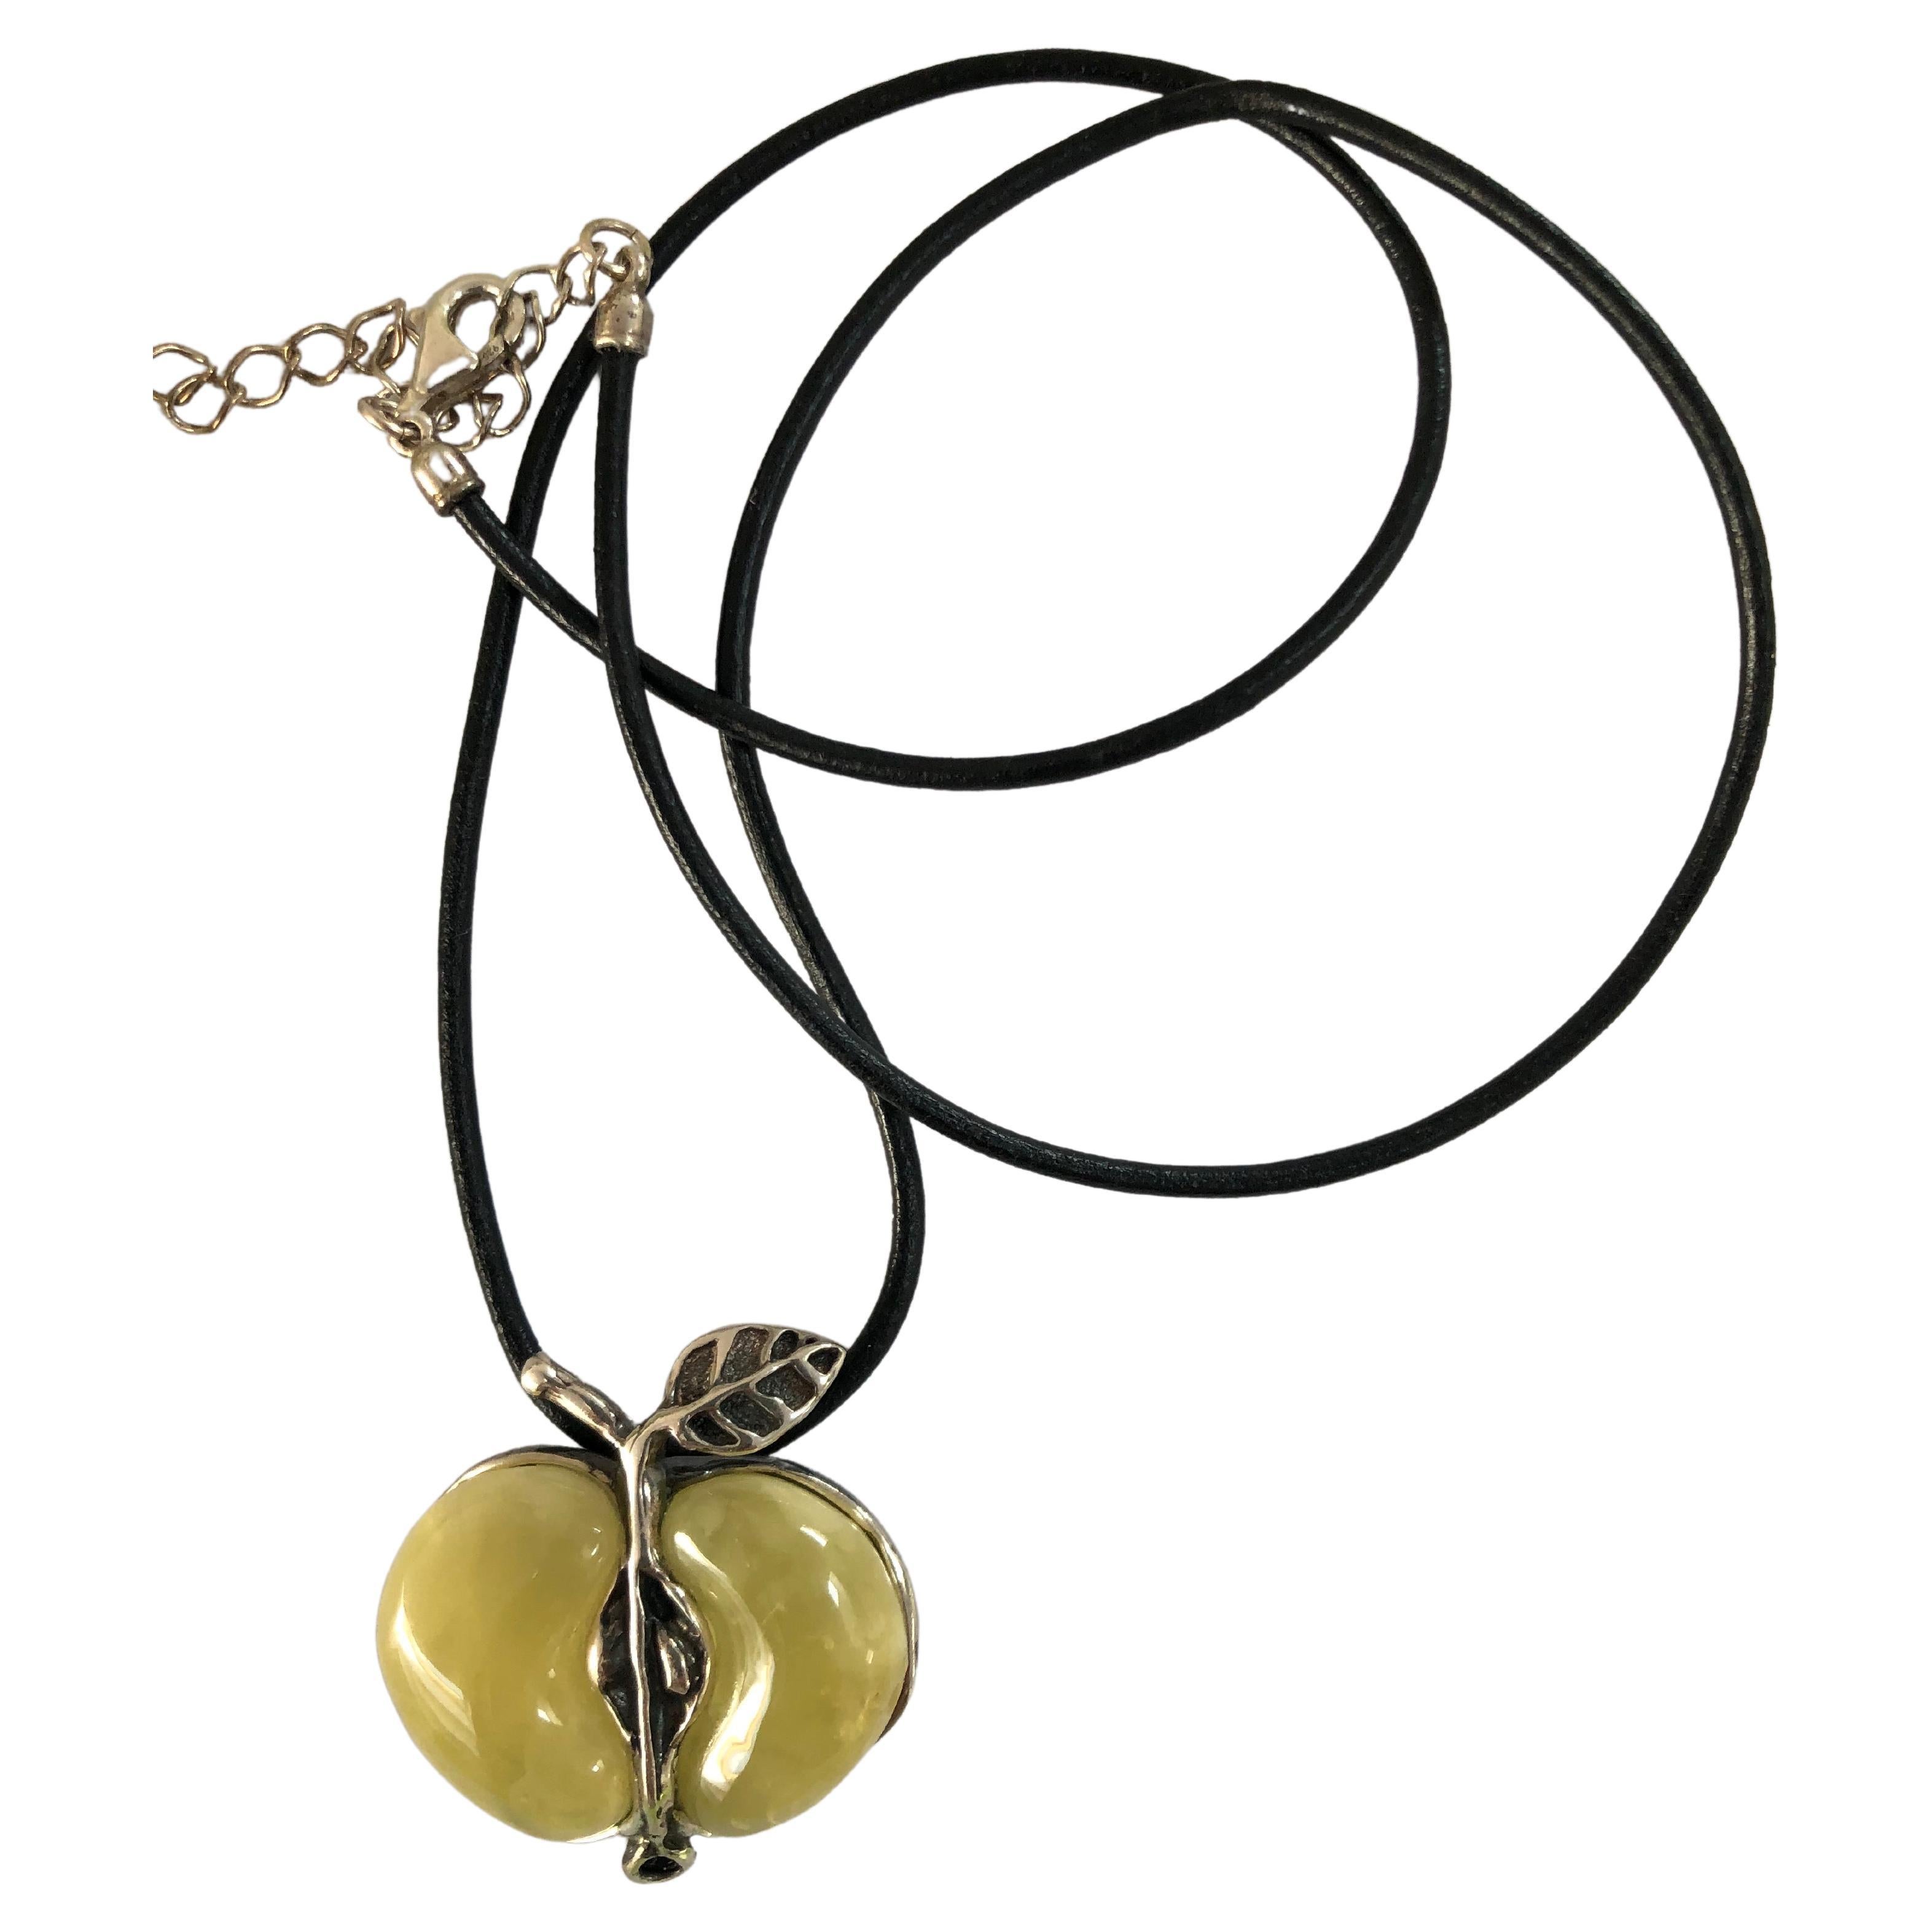 Unique handmade amber and sterling silver 925, pendant necklace on leather strap with sterling clasp. The light green milky amber is apple-shaped delicately set in sterling silver. Strap length about 19 inches.